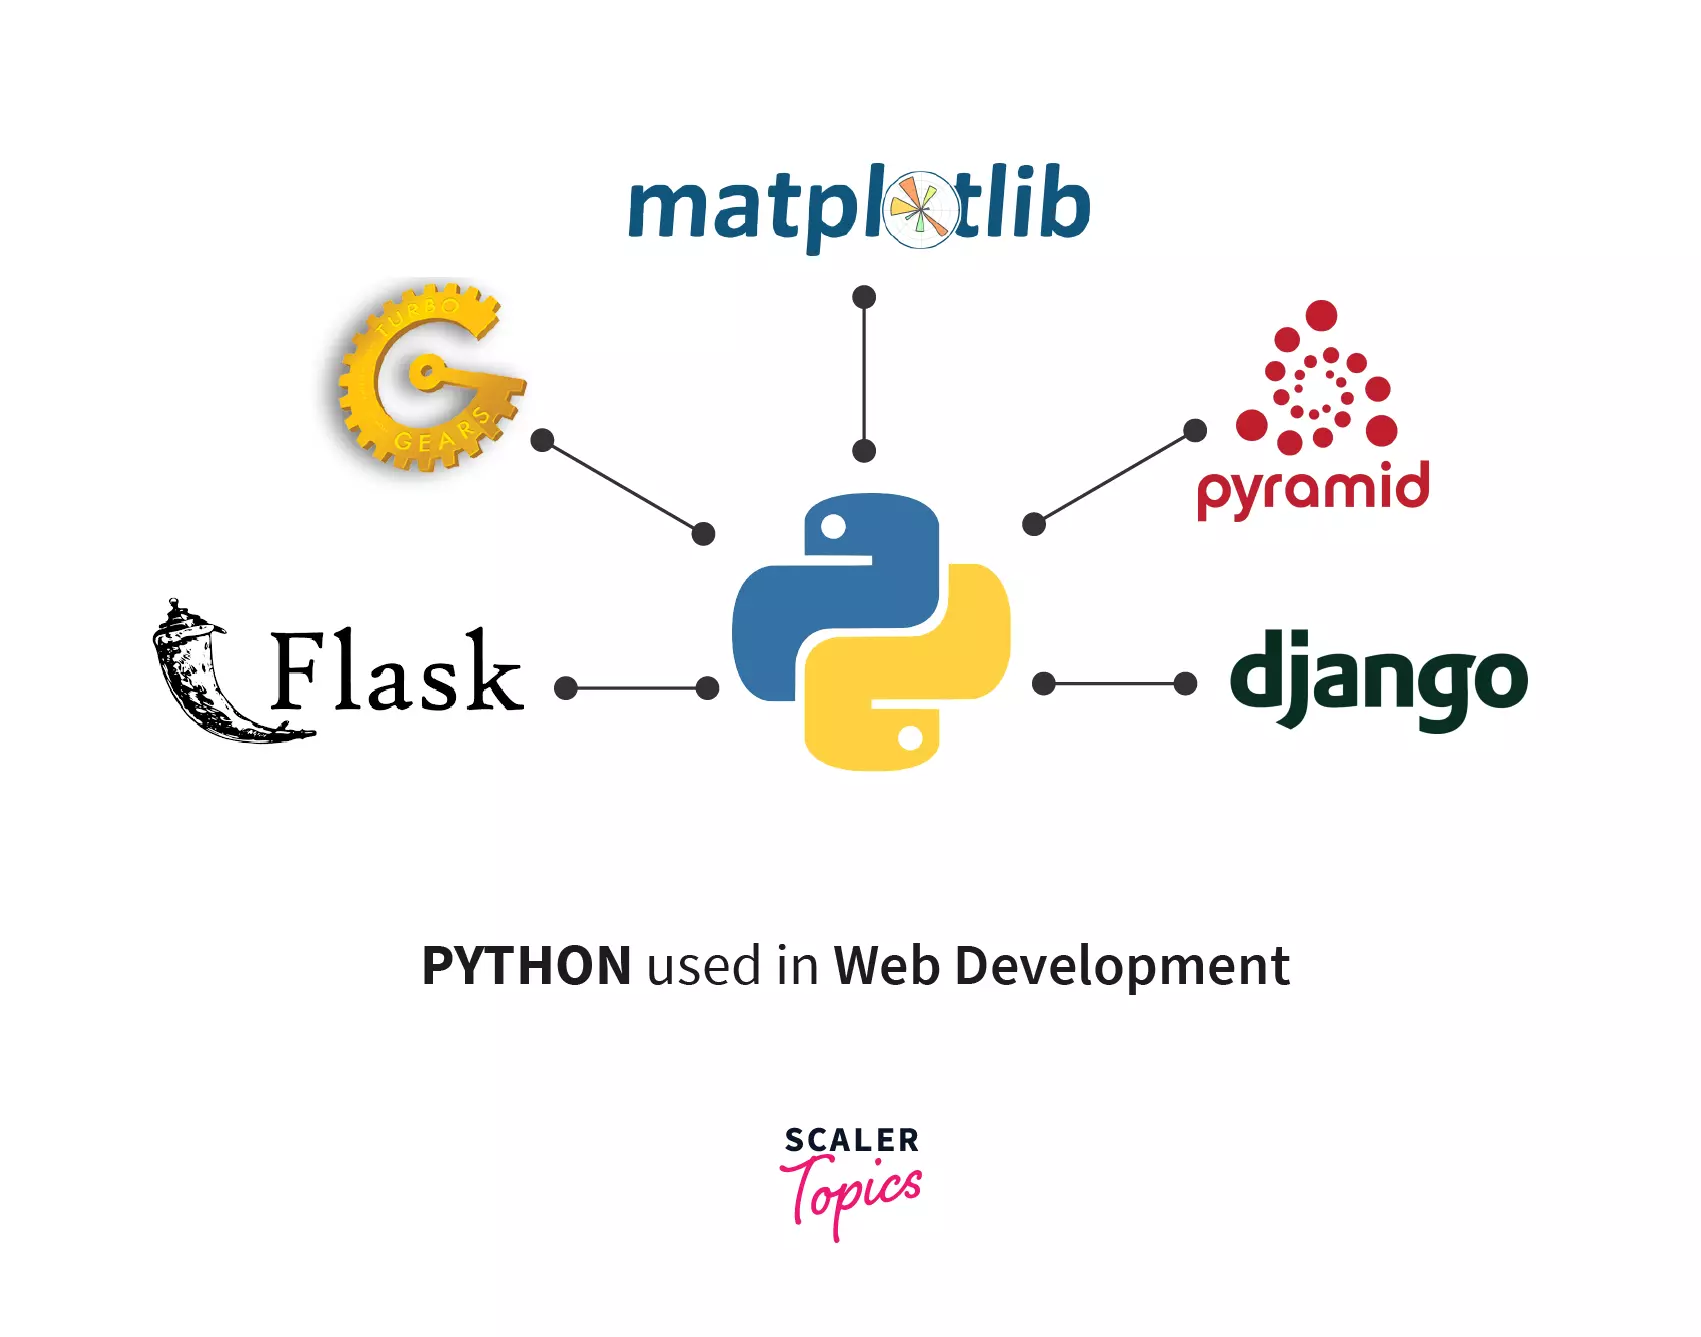 Python is used in Web Development